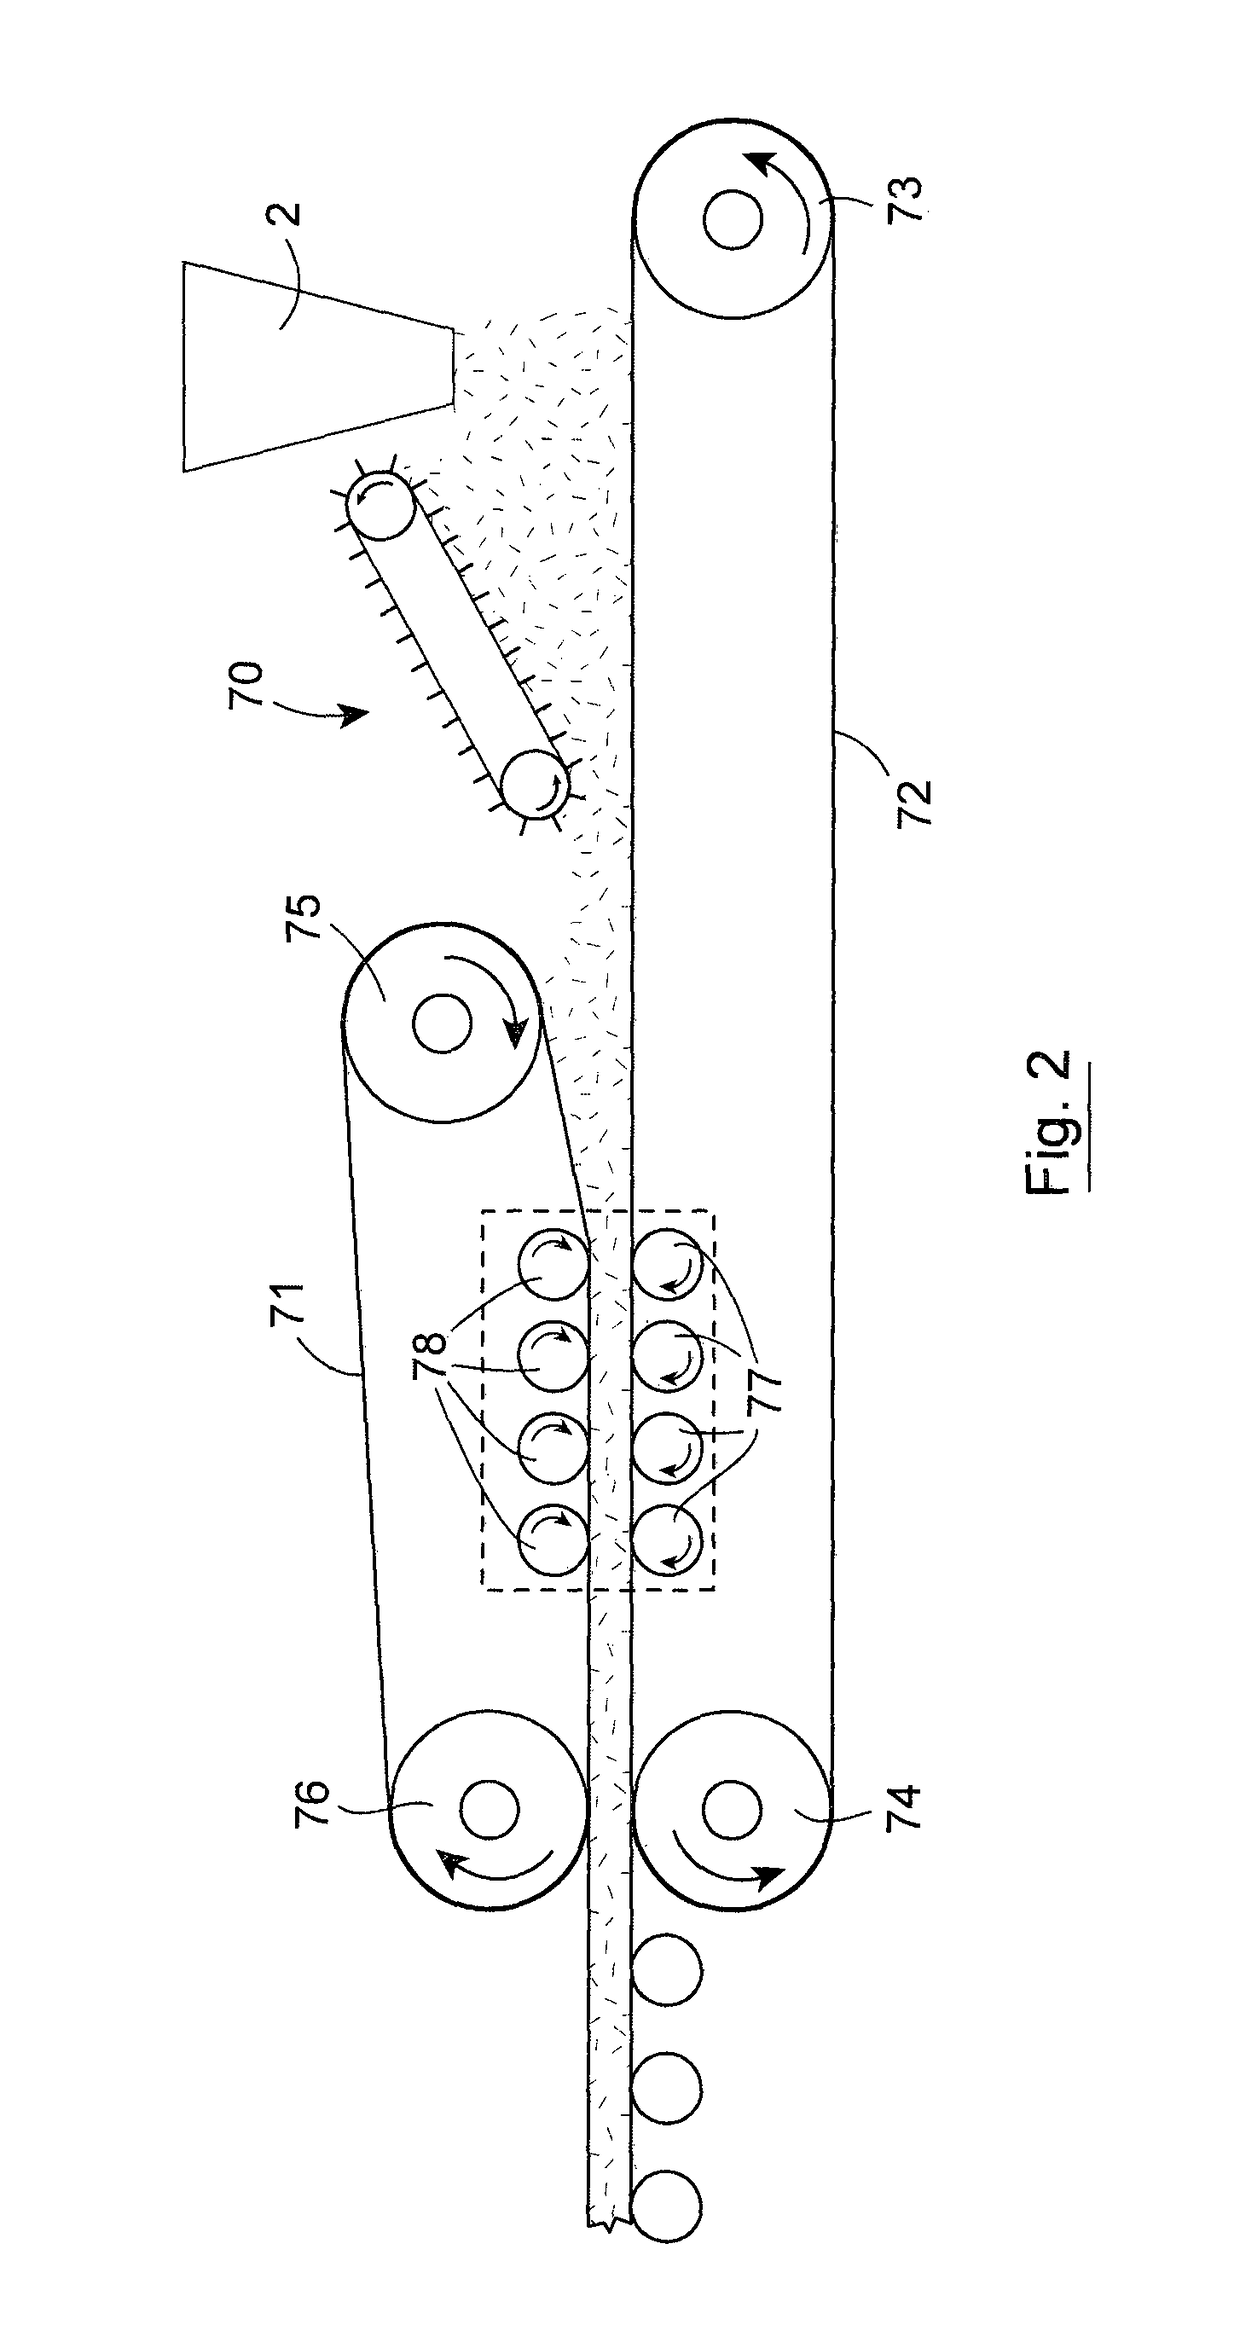 Method and apparatus for manufacturing an insulation panel